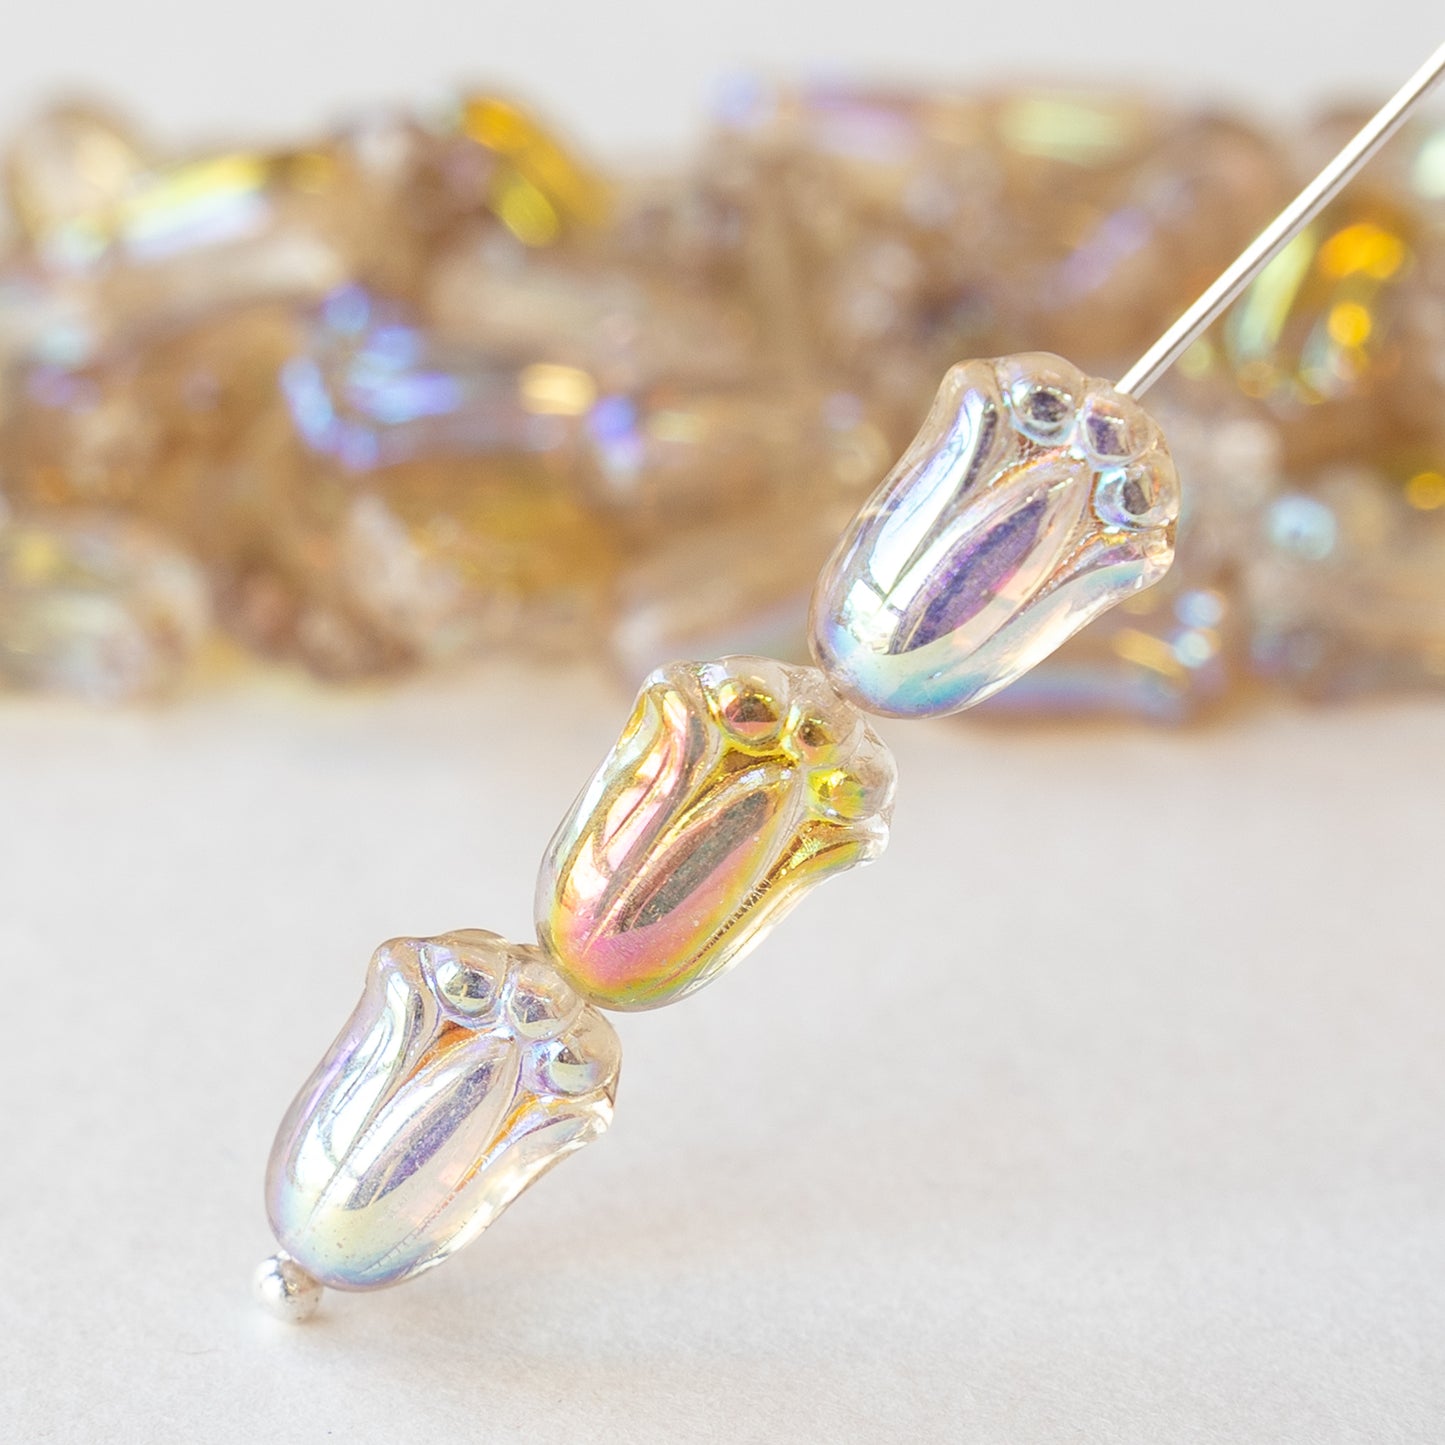 Load image into Gallery viewer, 12mm Glass Tulip Beads - Champagne Luster with a Marea finish - 10 Beads
